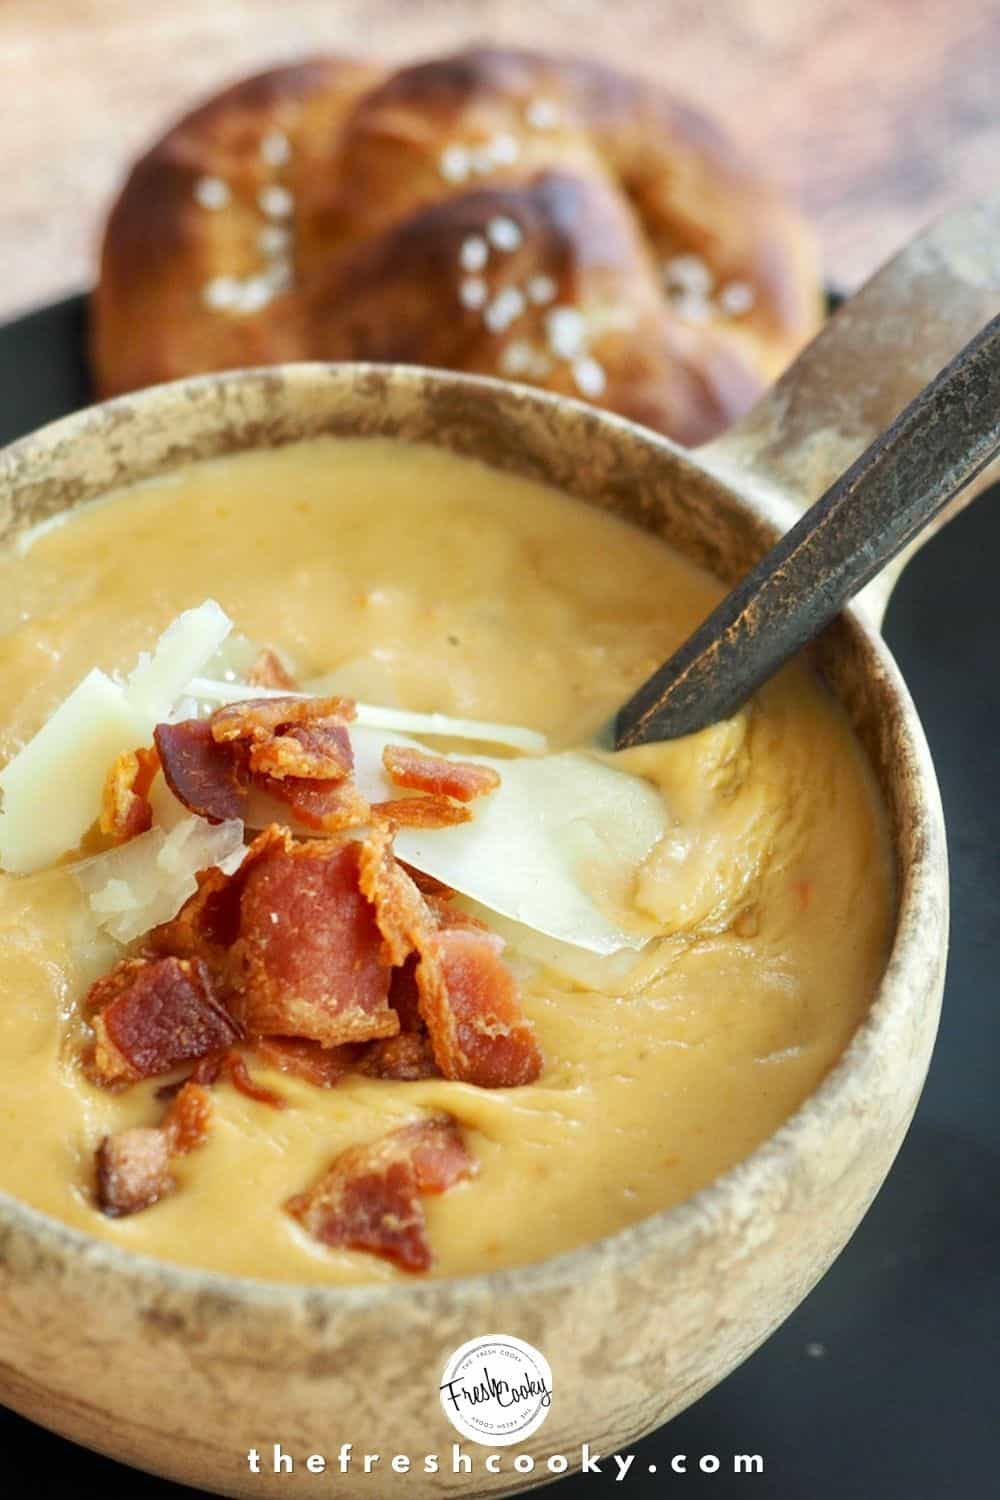 Image of a stone bowl filled with creamy, beer cheese soup, topped with shredded white cheddar and crumbled bacon, spoon in bowl with soft pretzel in background.